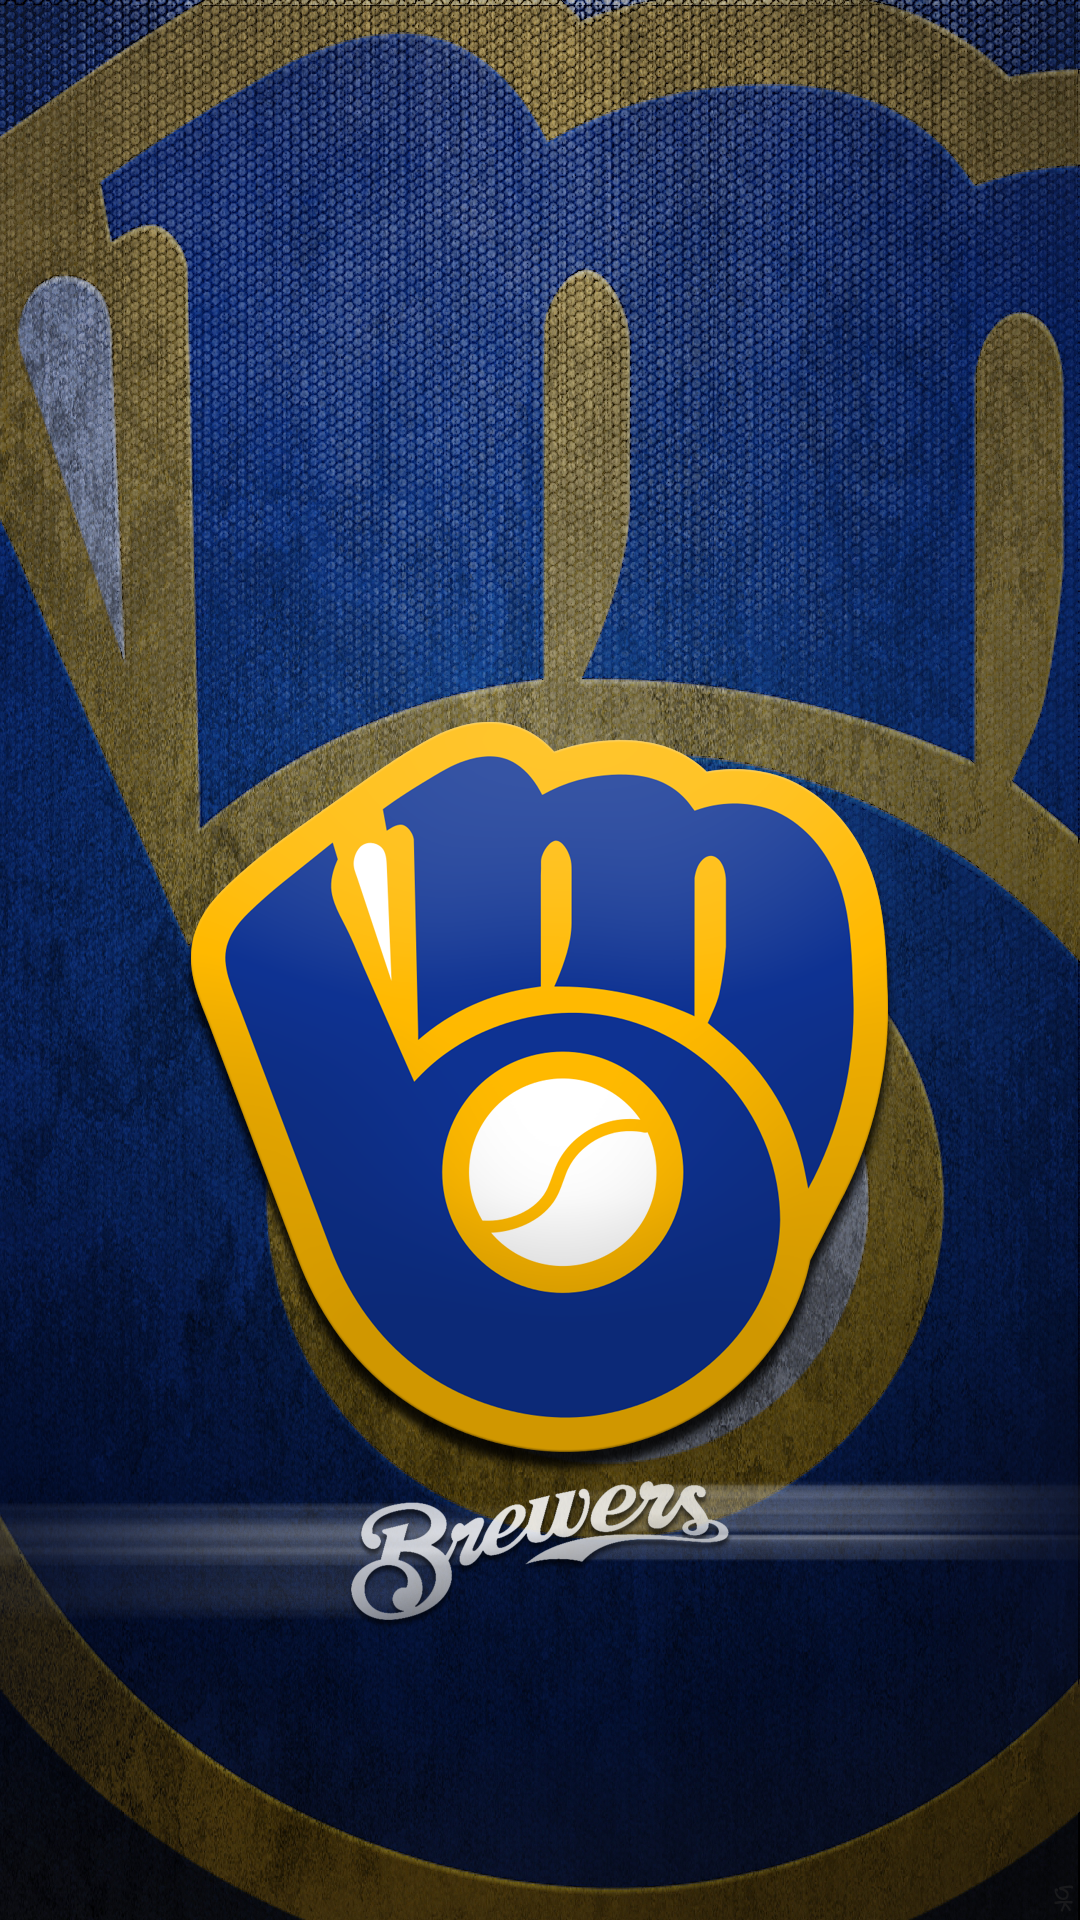 Brewers Wallpaper. Brewers Wallpaper, Brewers Background and Milwaukee Brewers Wallpaper